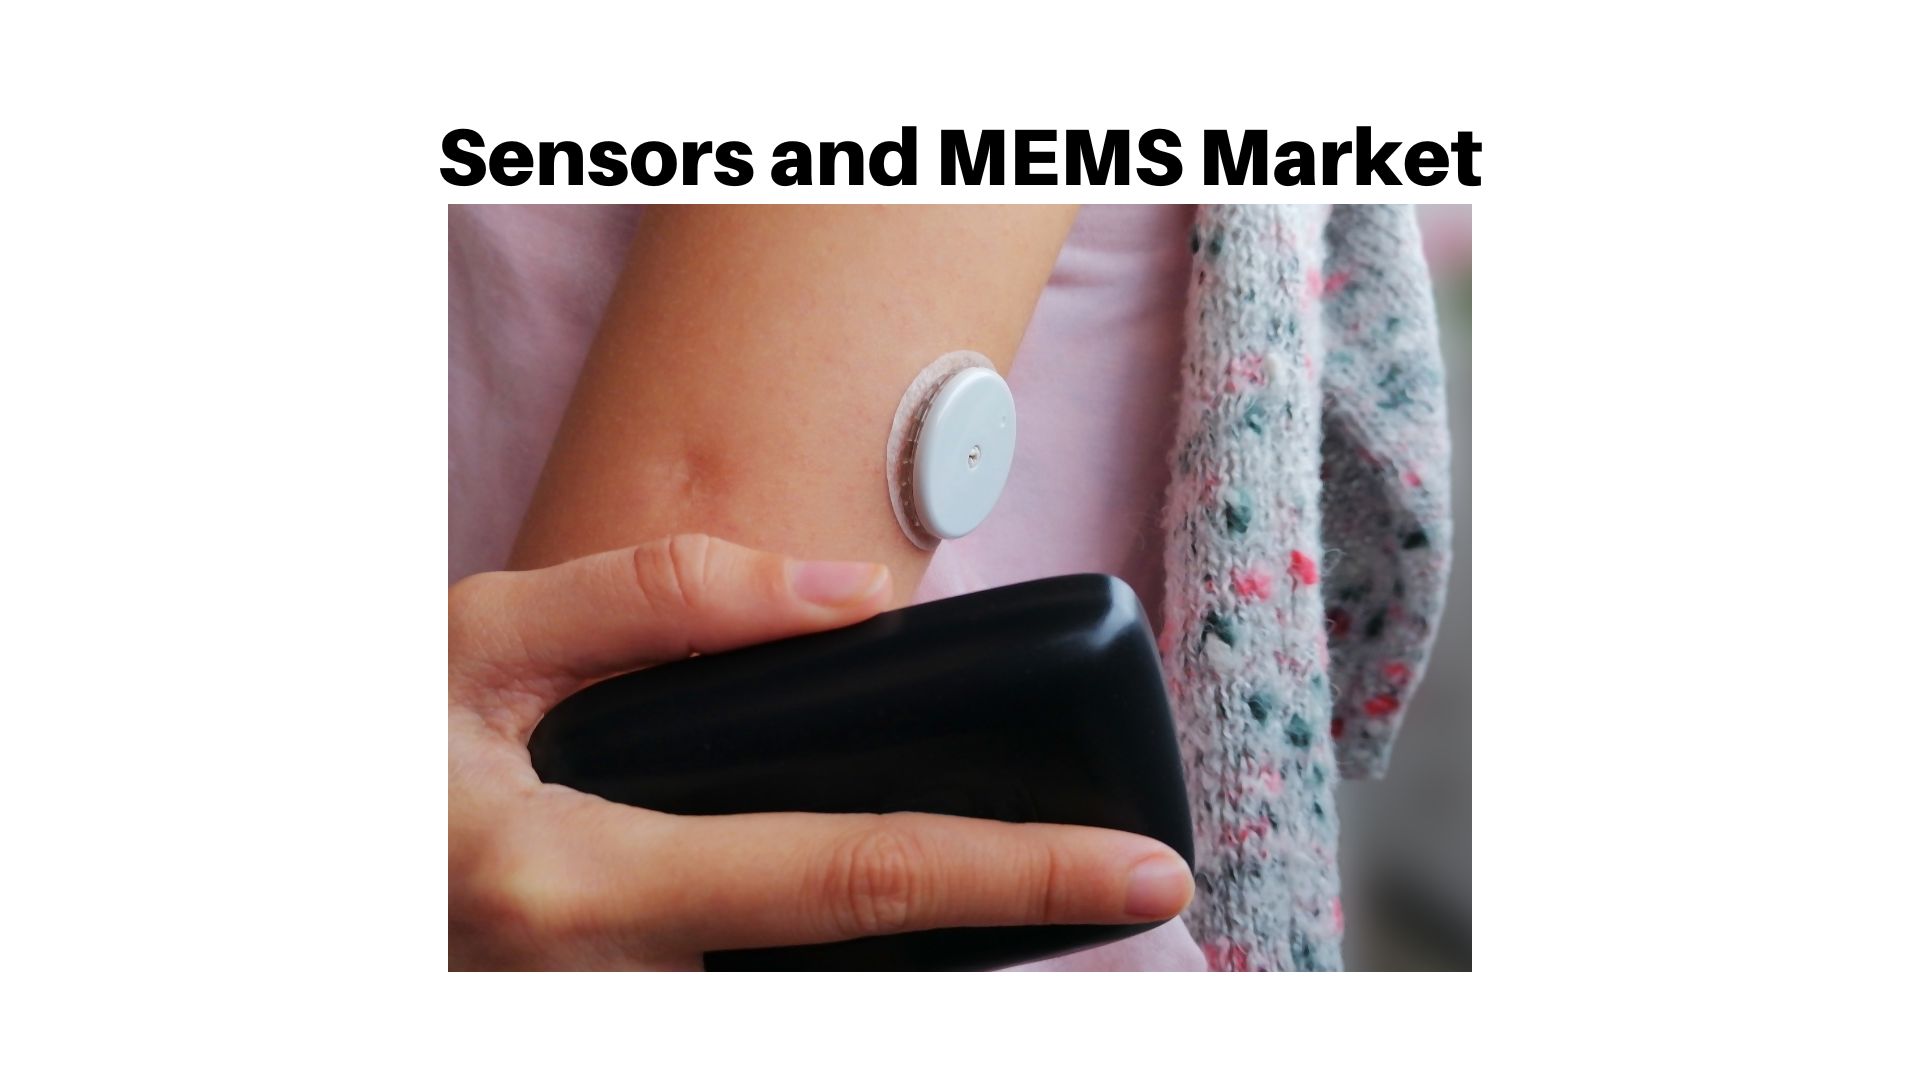 Sensors and MEMS Market Size is Projected to reach USD 34.6 Billion by 2032